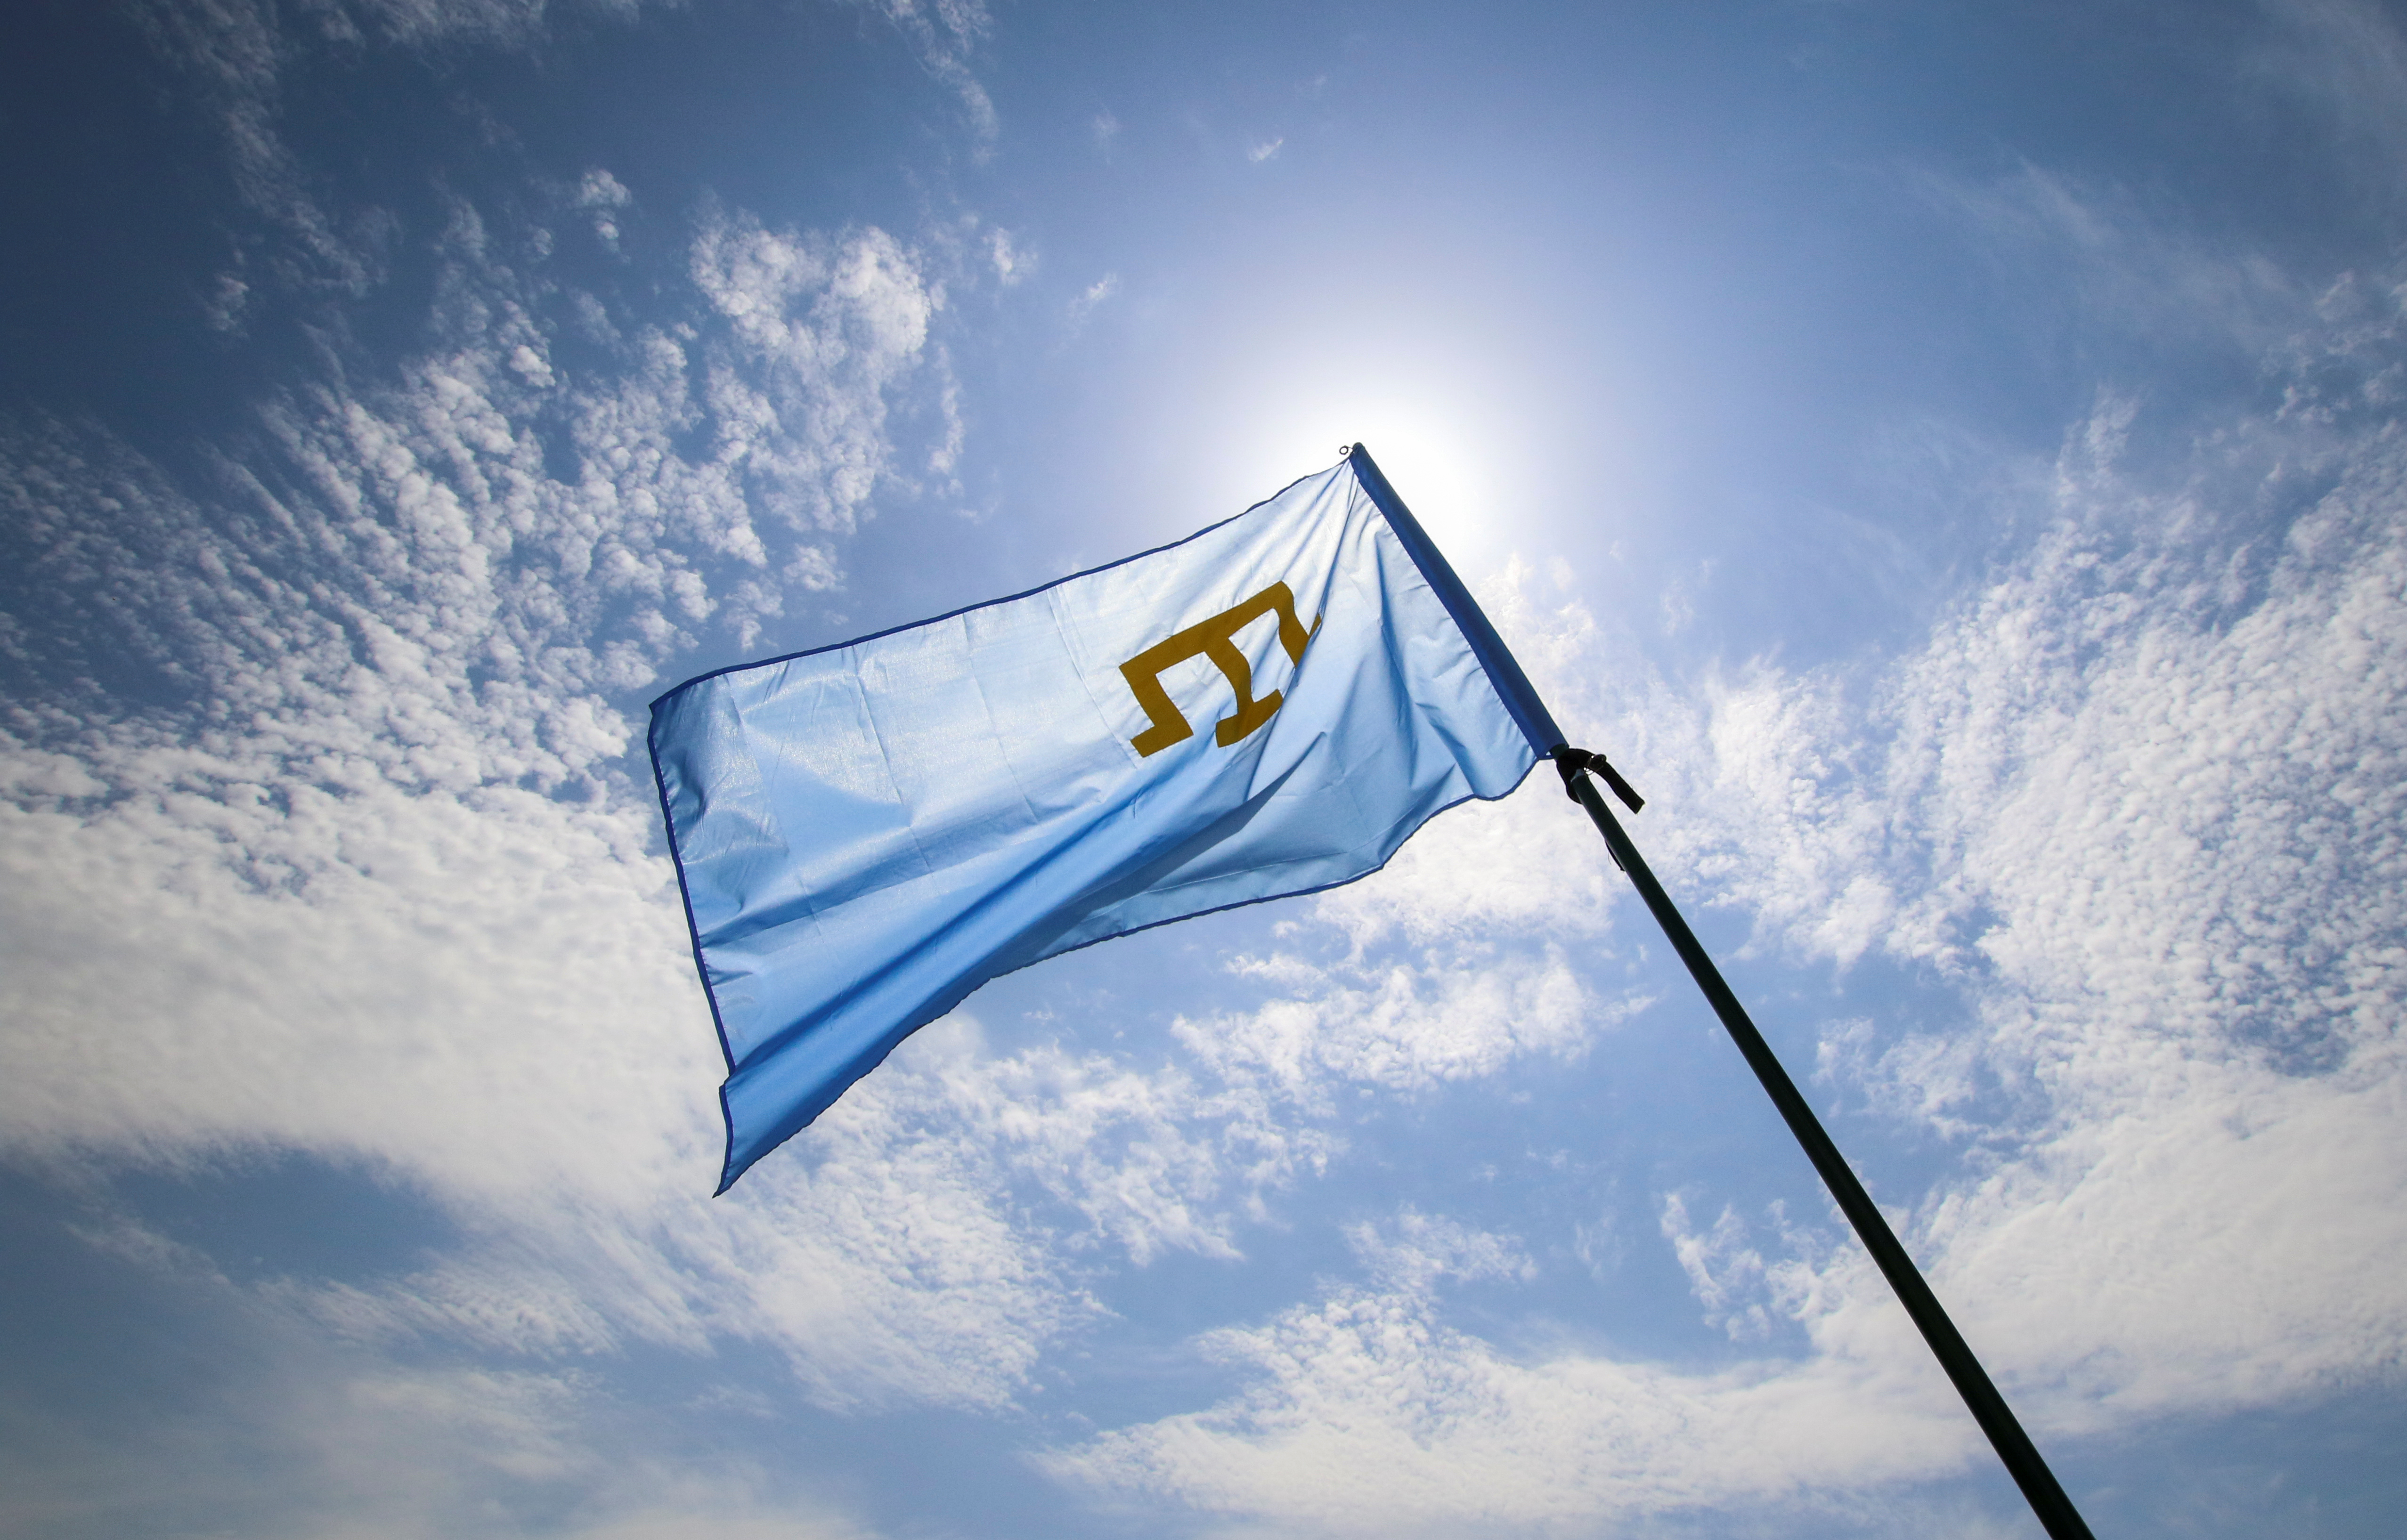 A Crimean Tatars flag flies at a rally, commemorating Crimean Tatars mass deportations from the region in 1944, in the village of Siren